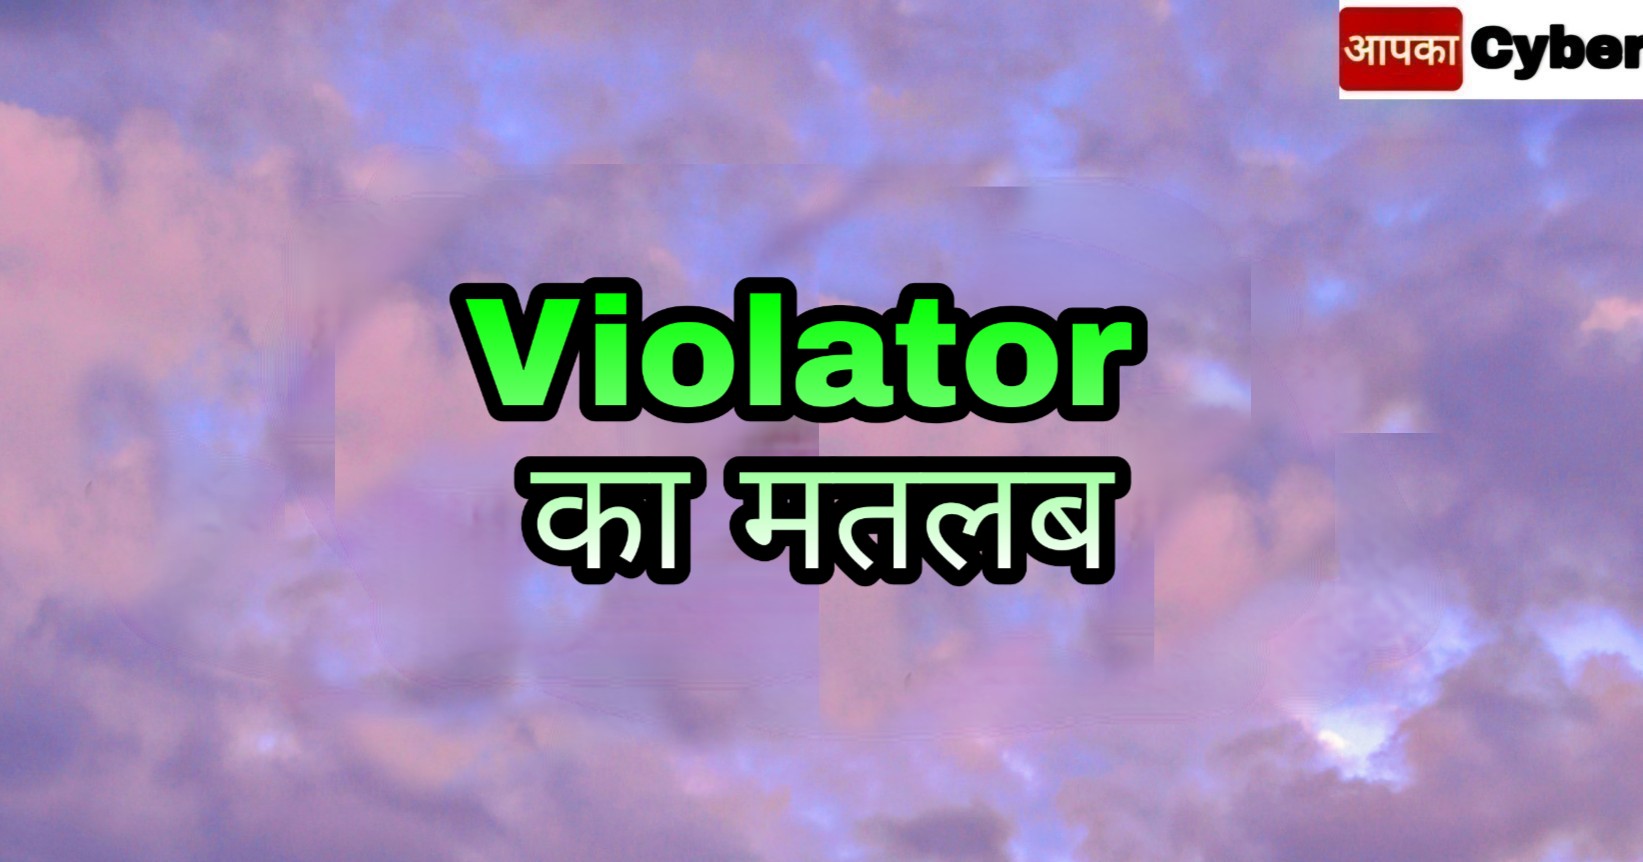 means of violator